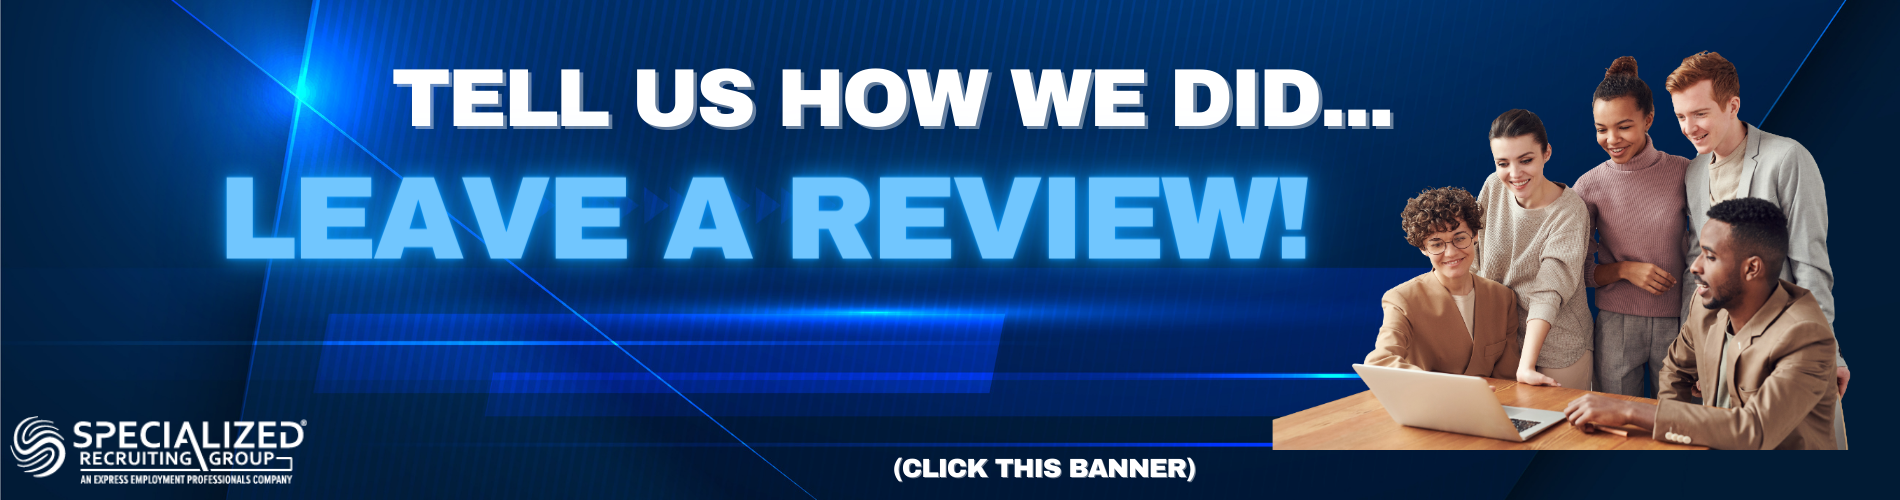 Leave us a Review Banner- SRG